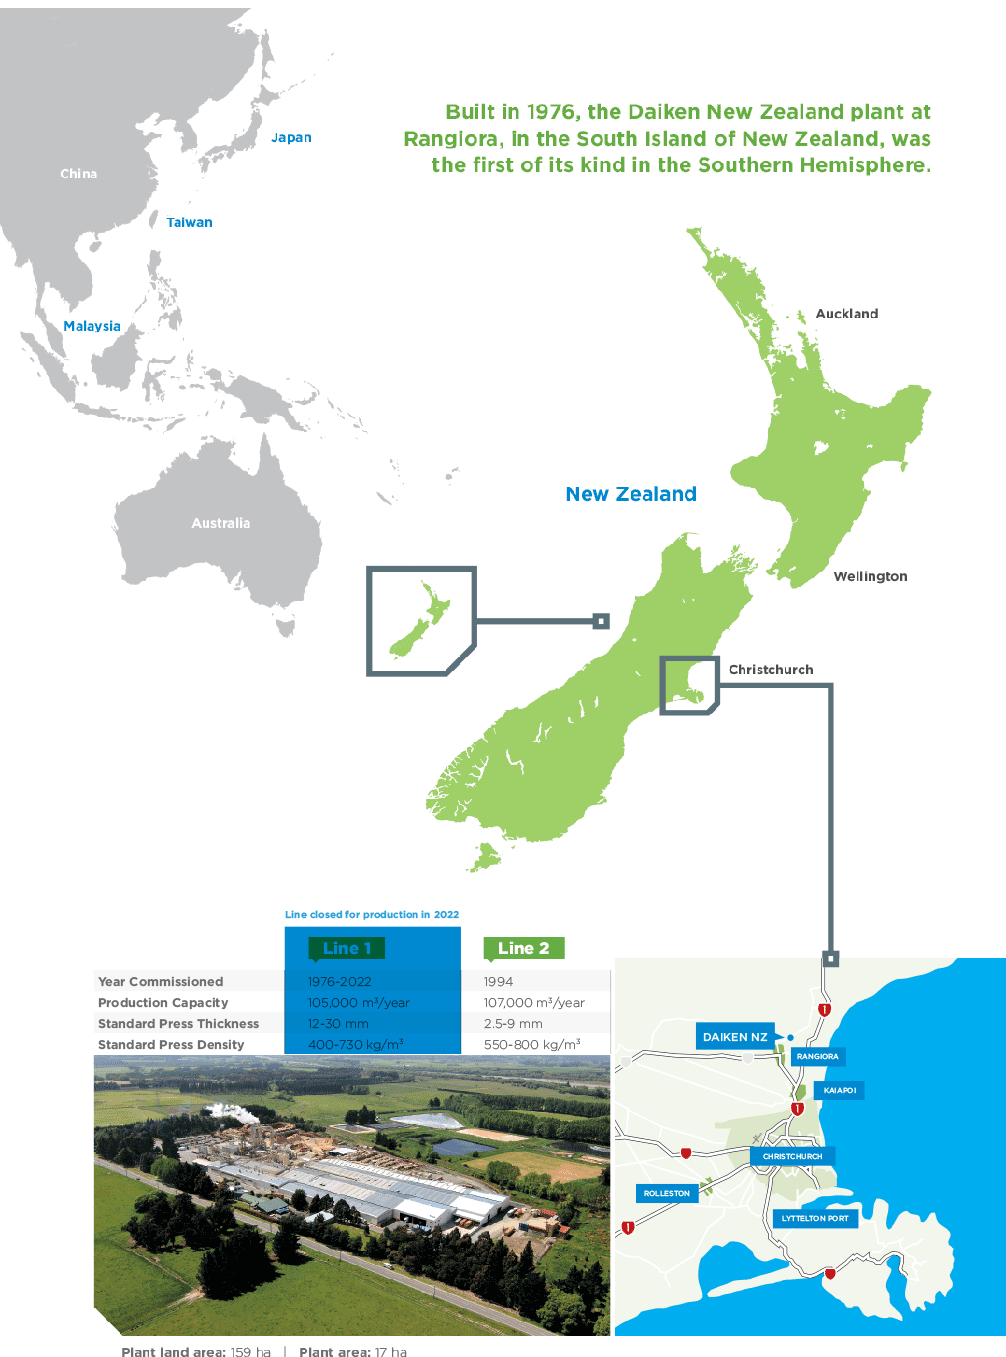 Built in 1976, the Daiken New Zealand plant at Rangiora, in the South Island of New Zealand, was the first of its kind in the Southern Hemisphere